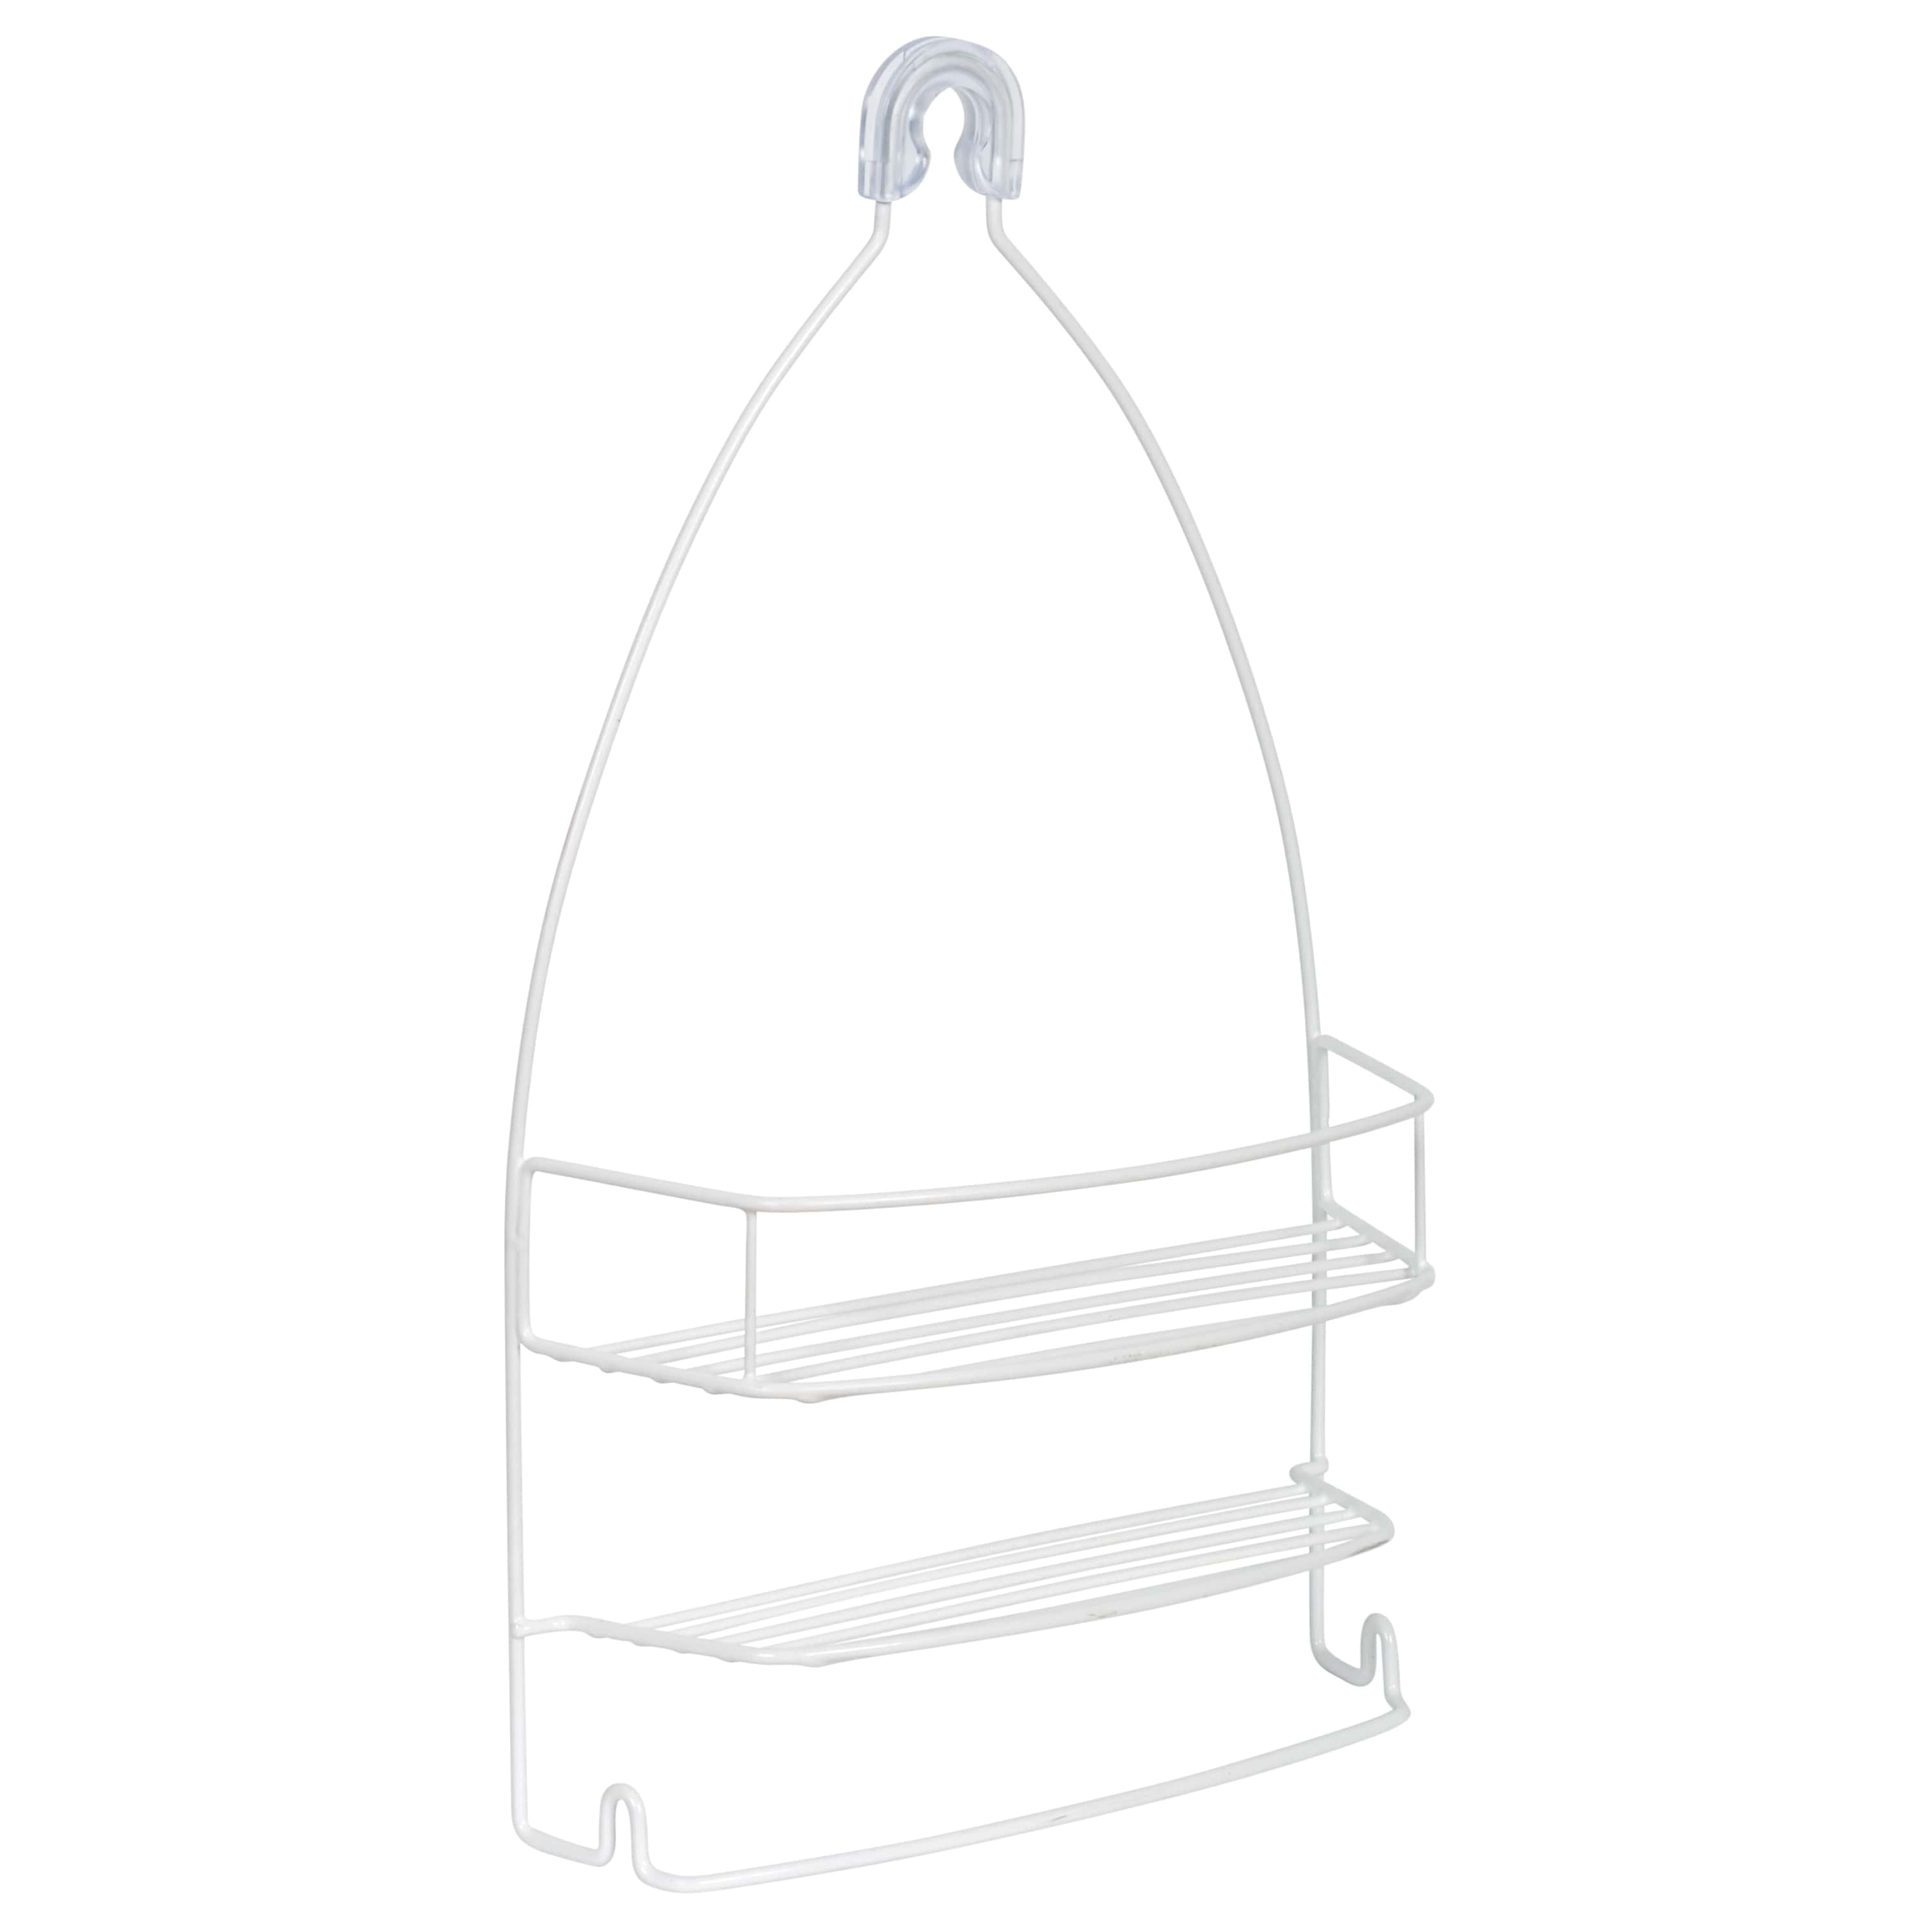 White Shower Caddy with 1 Shelf, Mainstays over the Showerhead - image 1 of 8